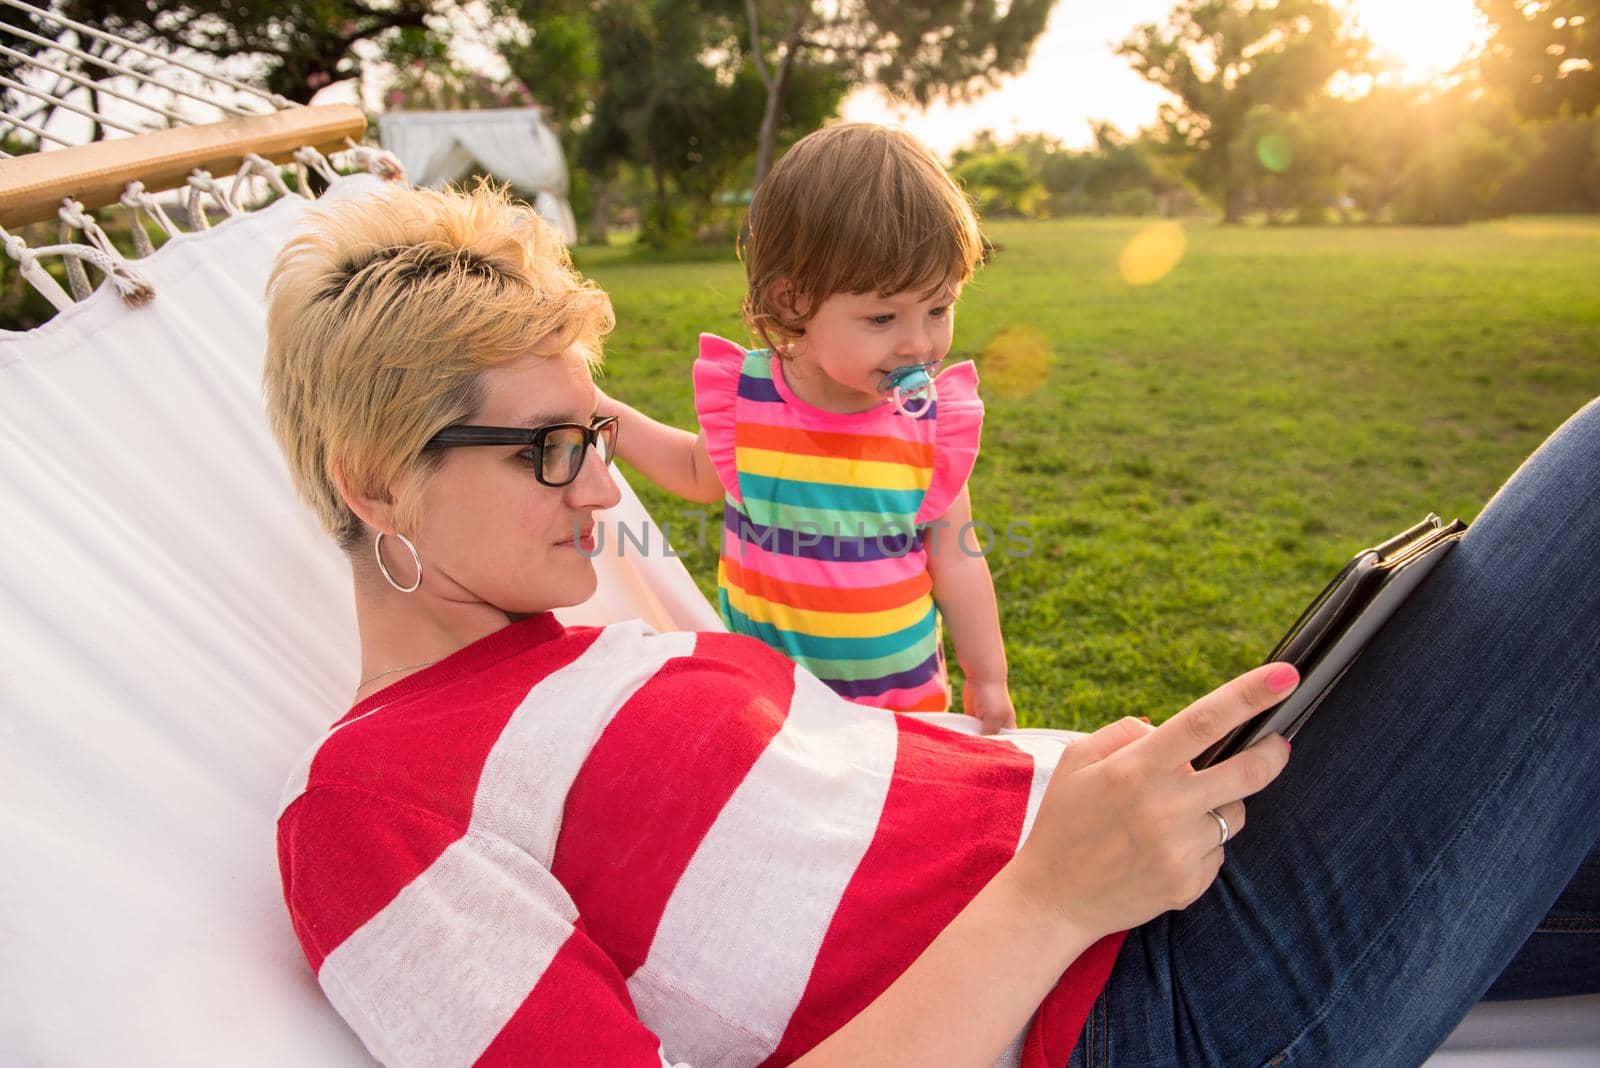 Happy mother and her little daughter enjoying free time using tablet computer while relaxing in a hammock during sunny day on holiday home garden